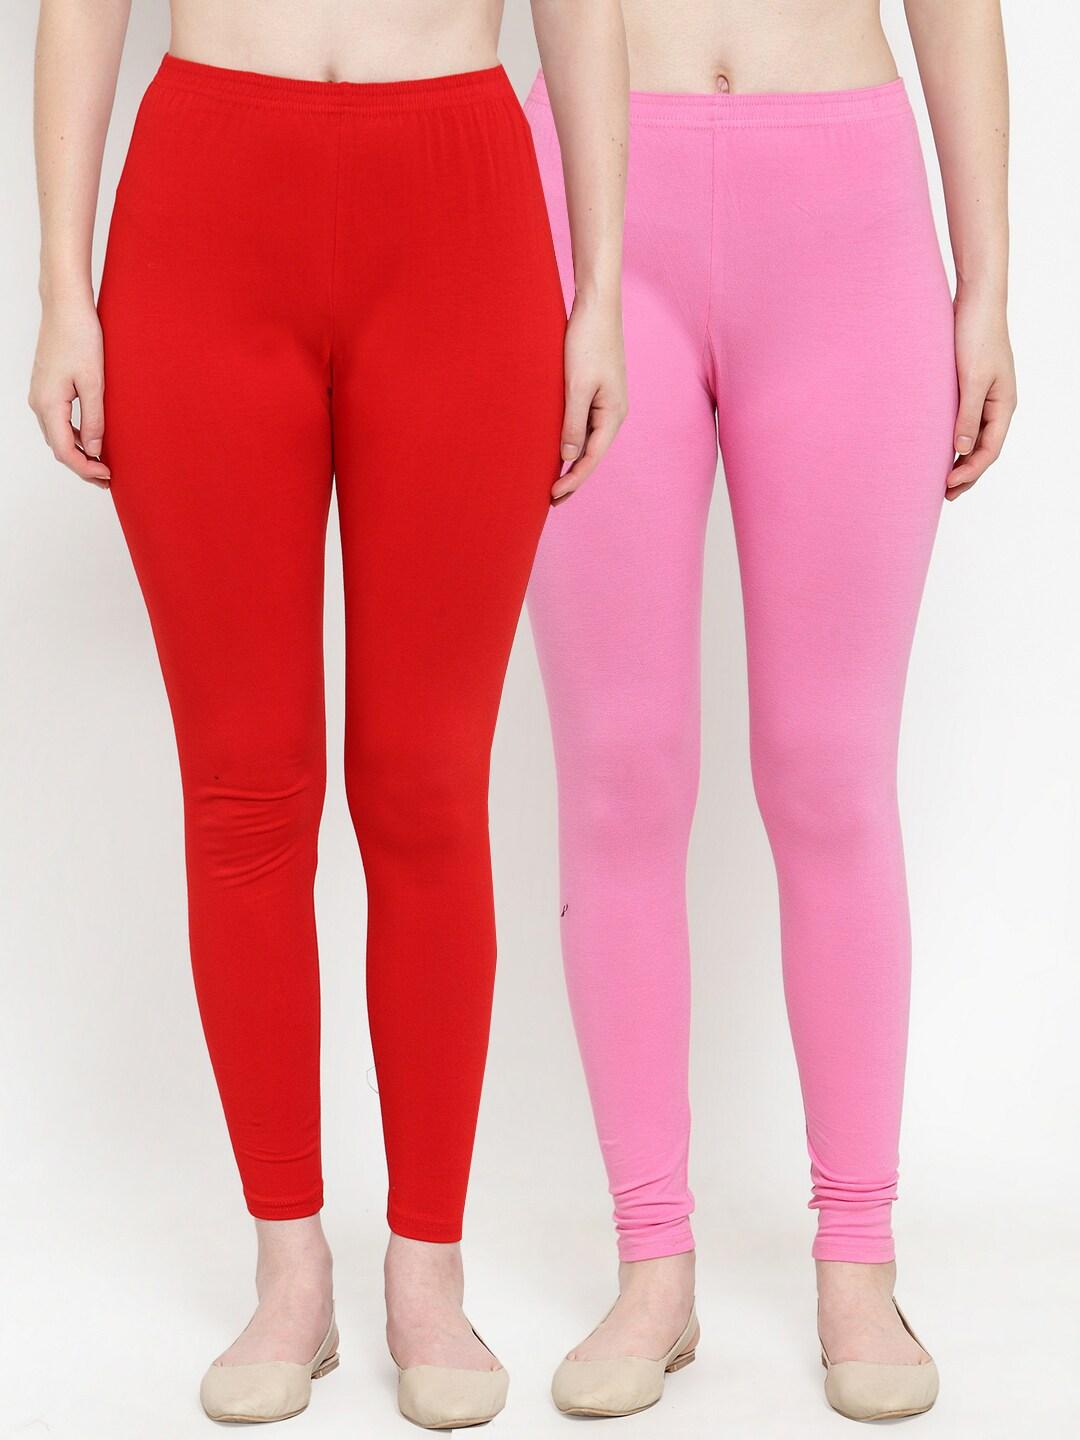 gracit women red & pink pack of 2 solid ankle-length leggings